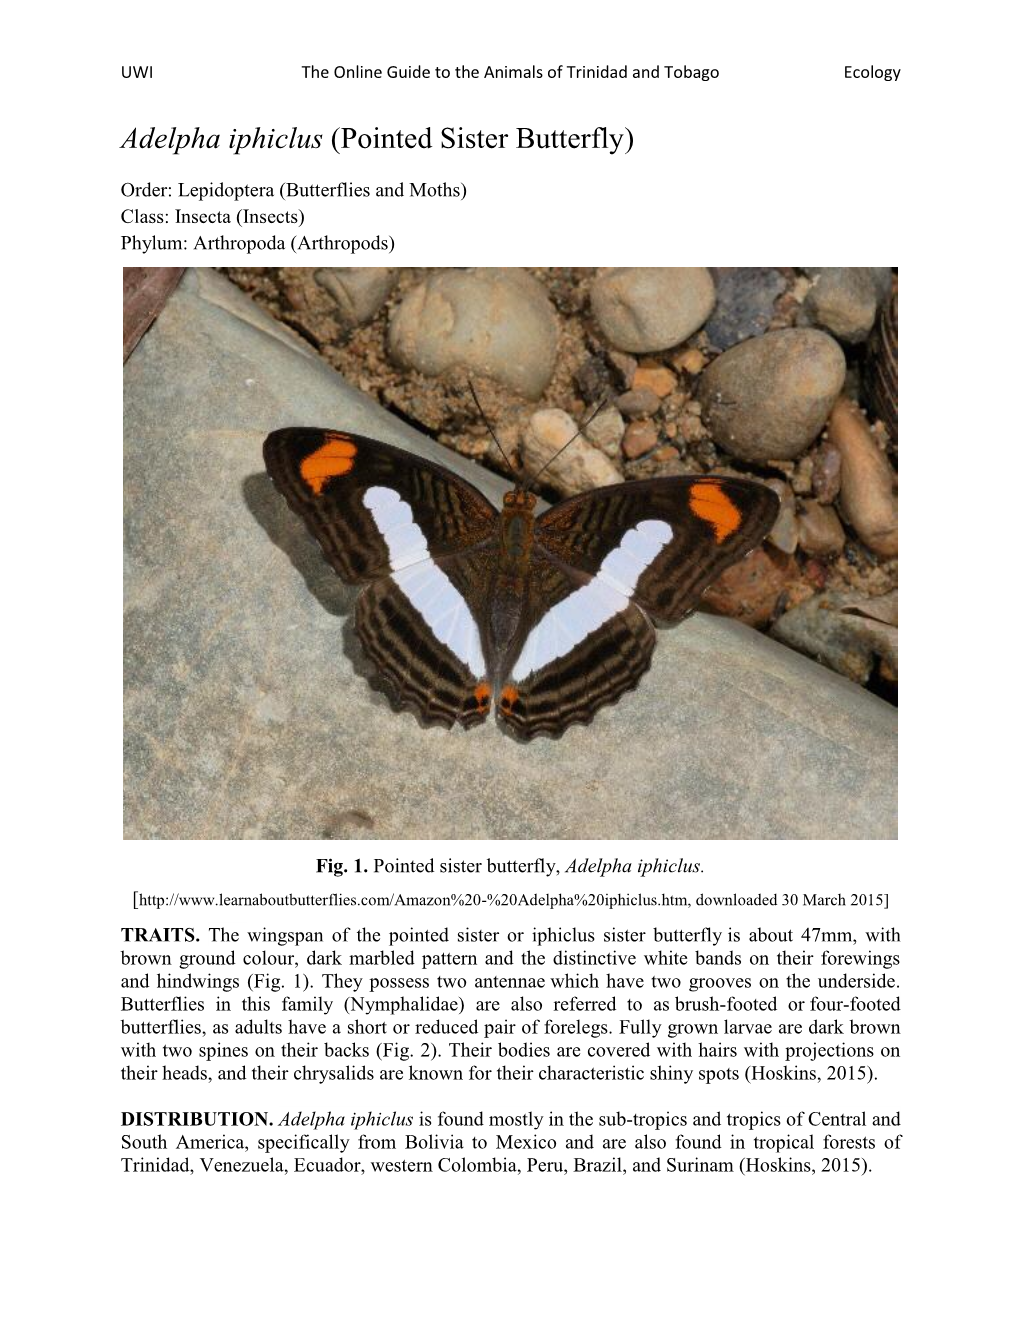 Adelpha Iphiclus (Pointed Sister Butterfly)